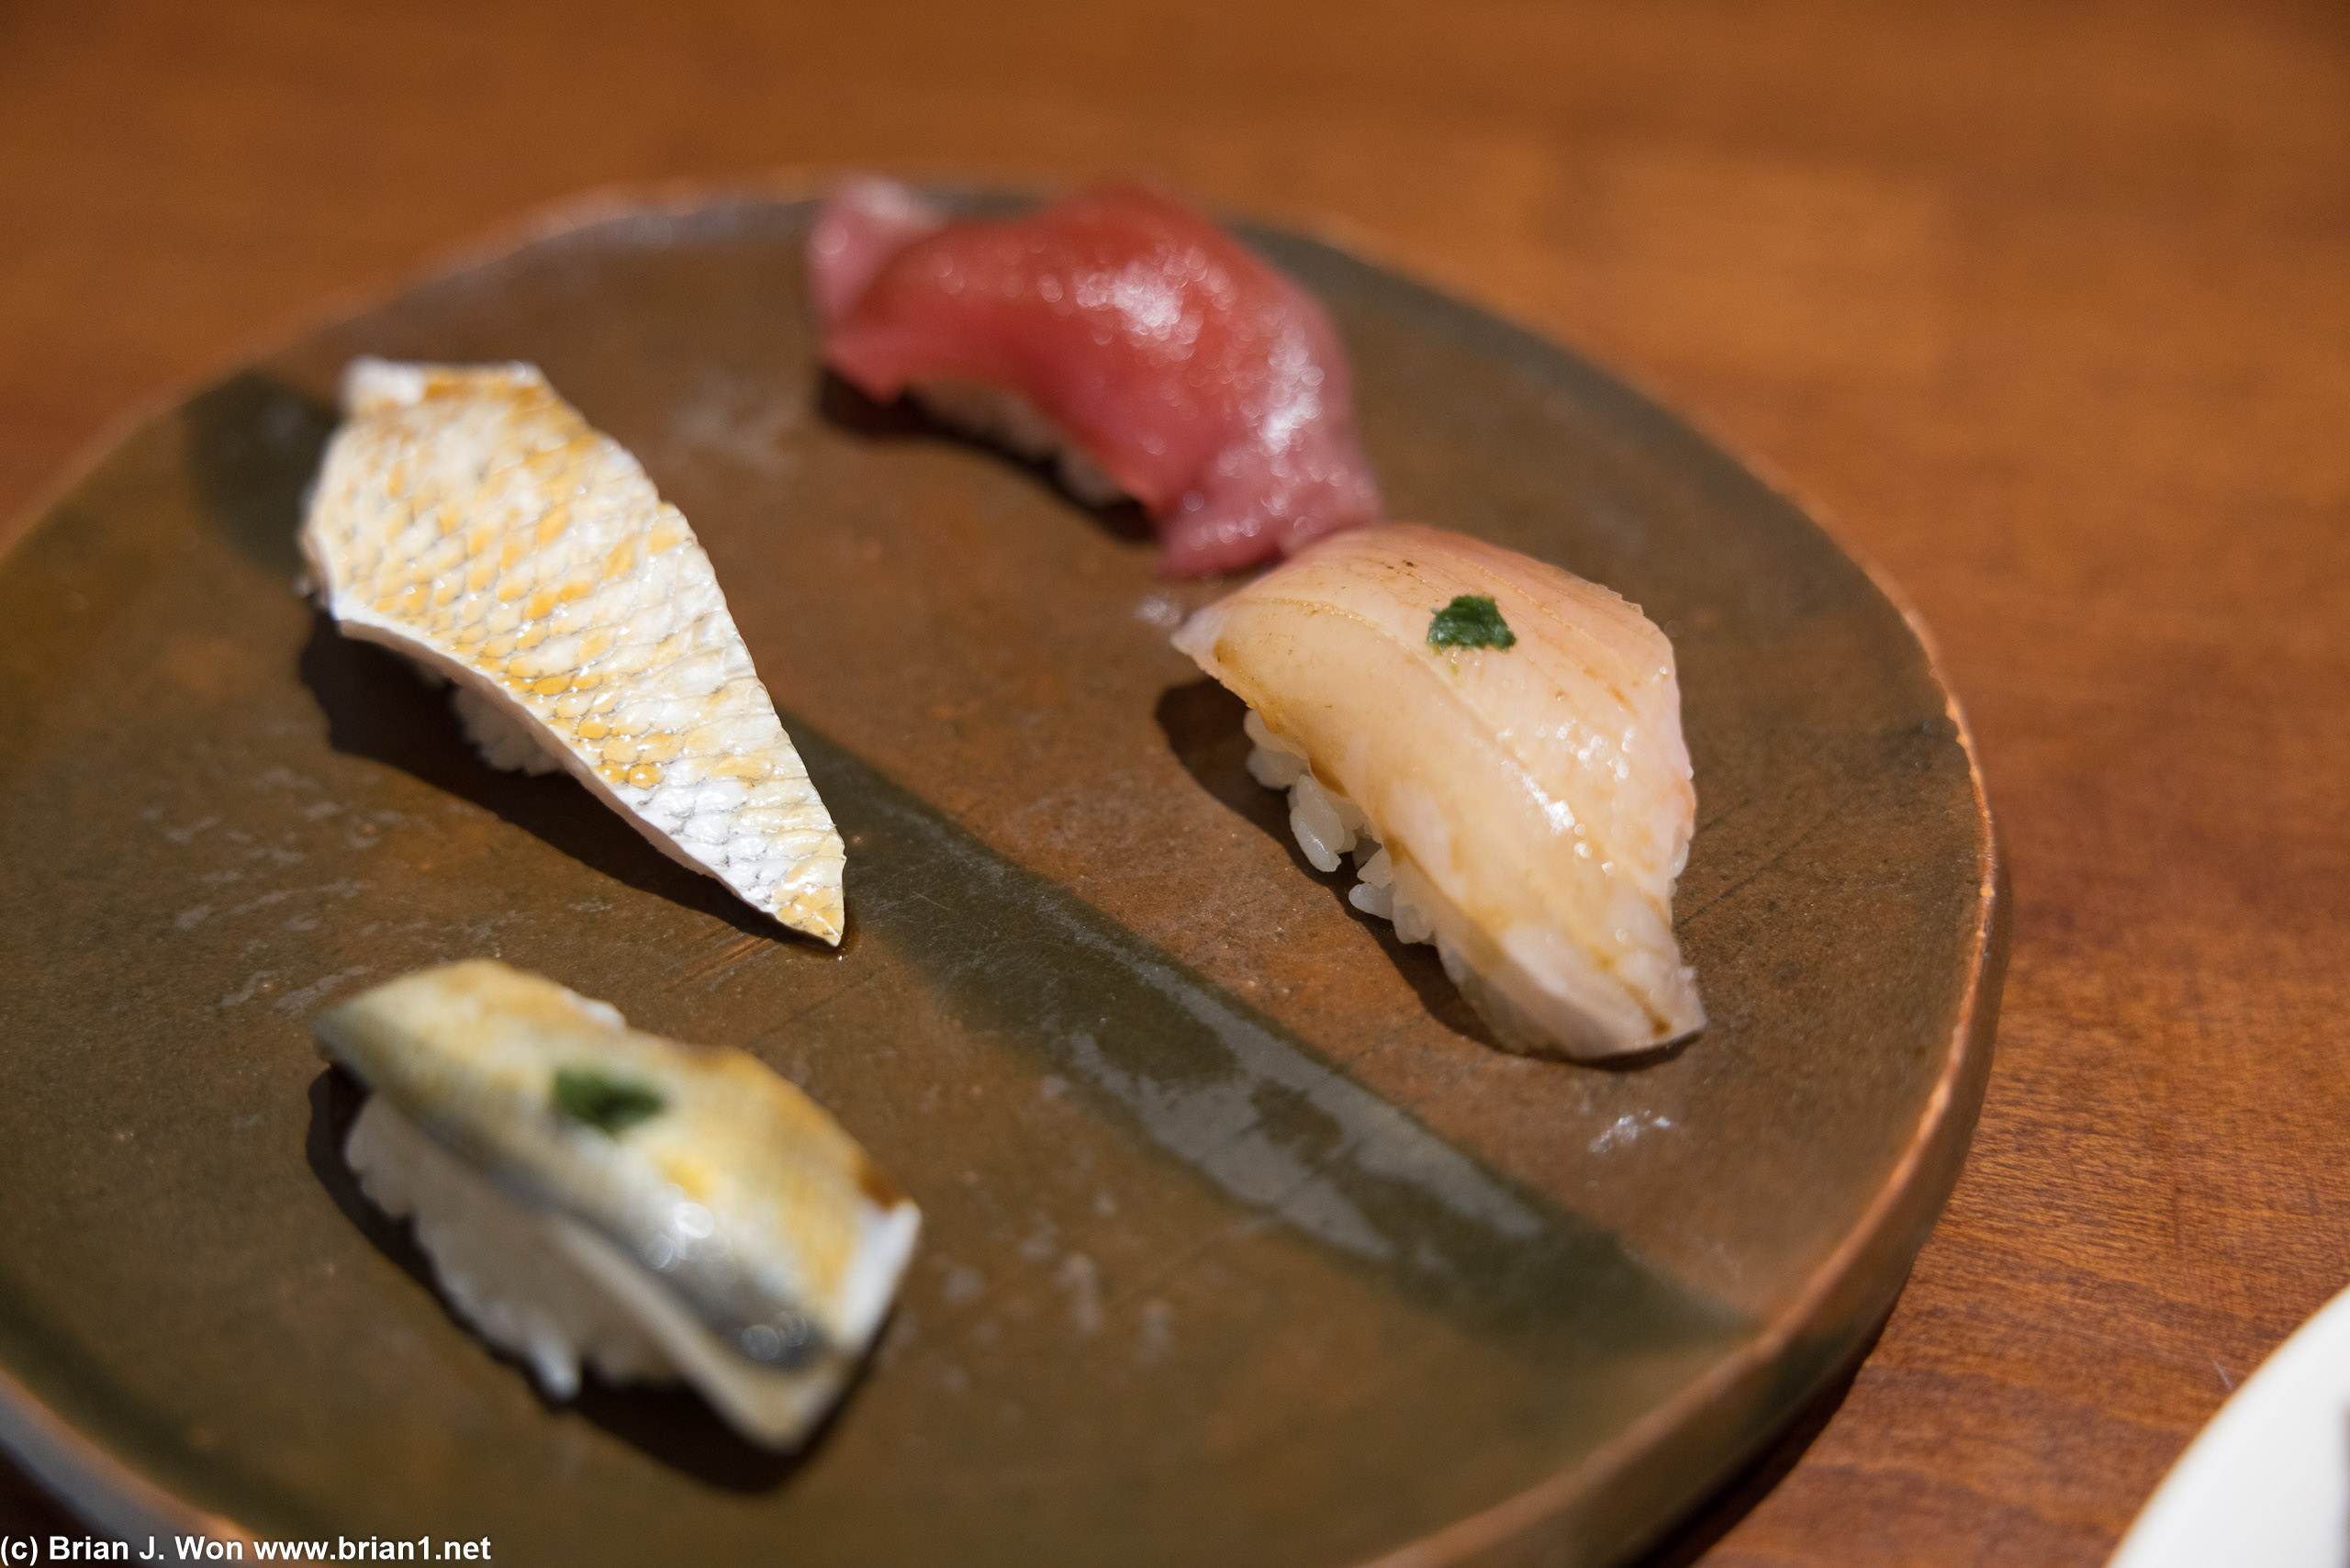 Kasugo (young sea bream) at left, kinmedai (golden eye snapper) at right.